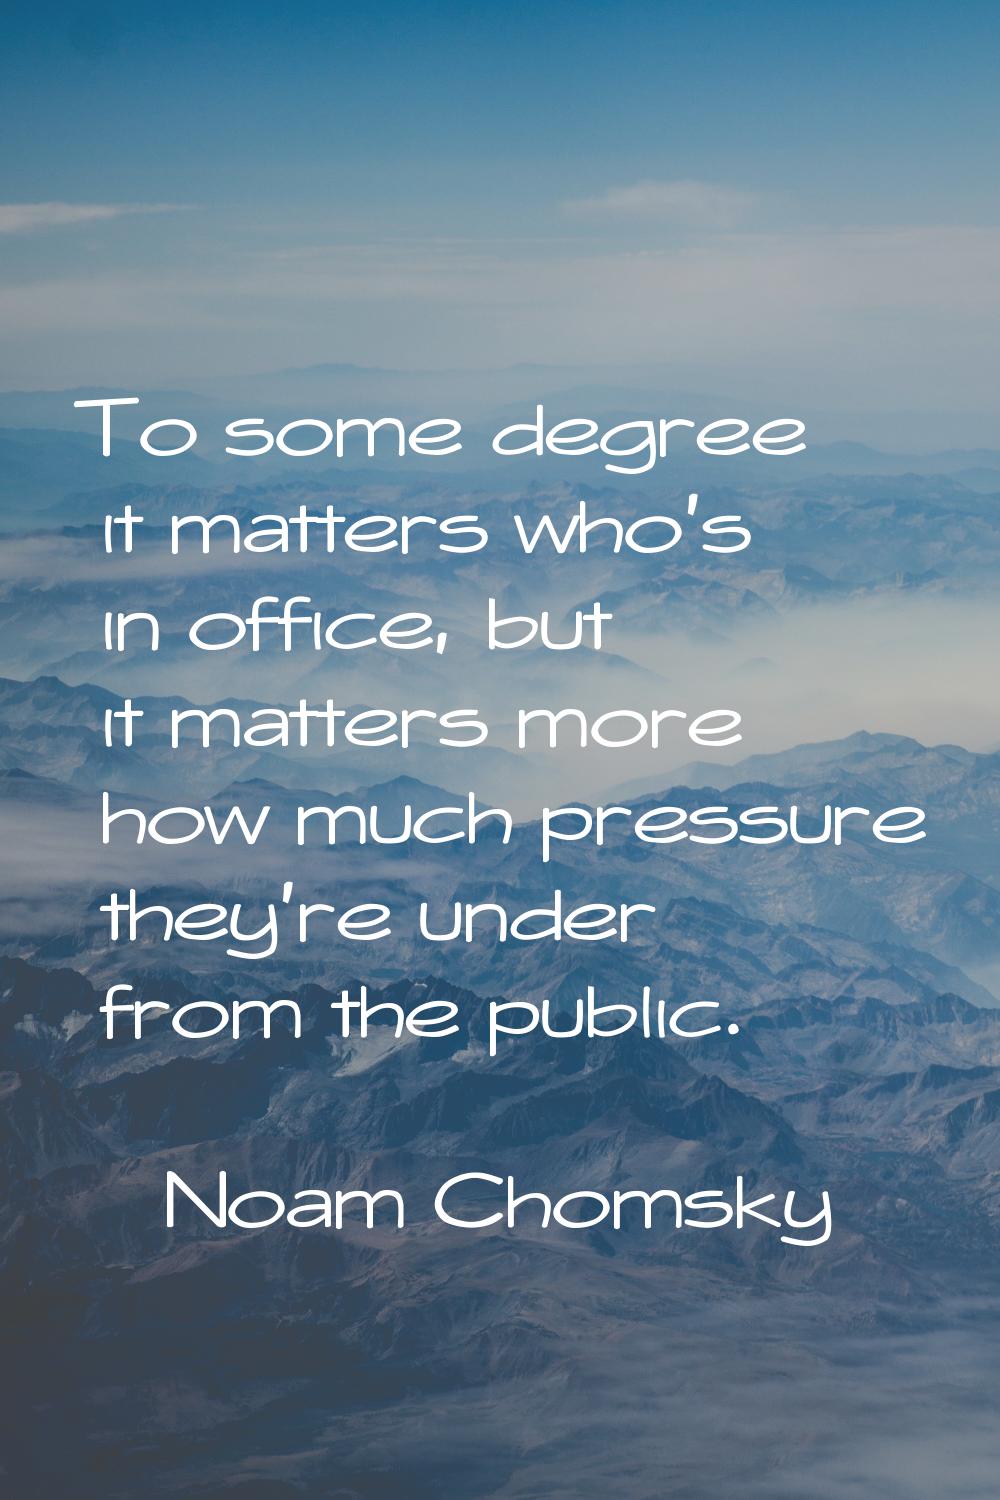 To some degree it matters who's in office, but it matters more how much pressure they're under from